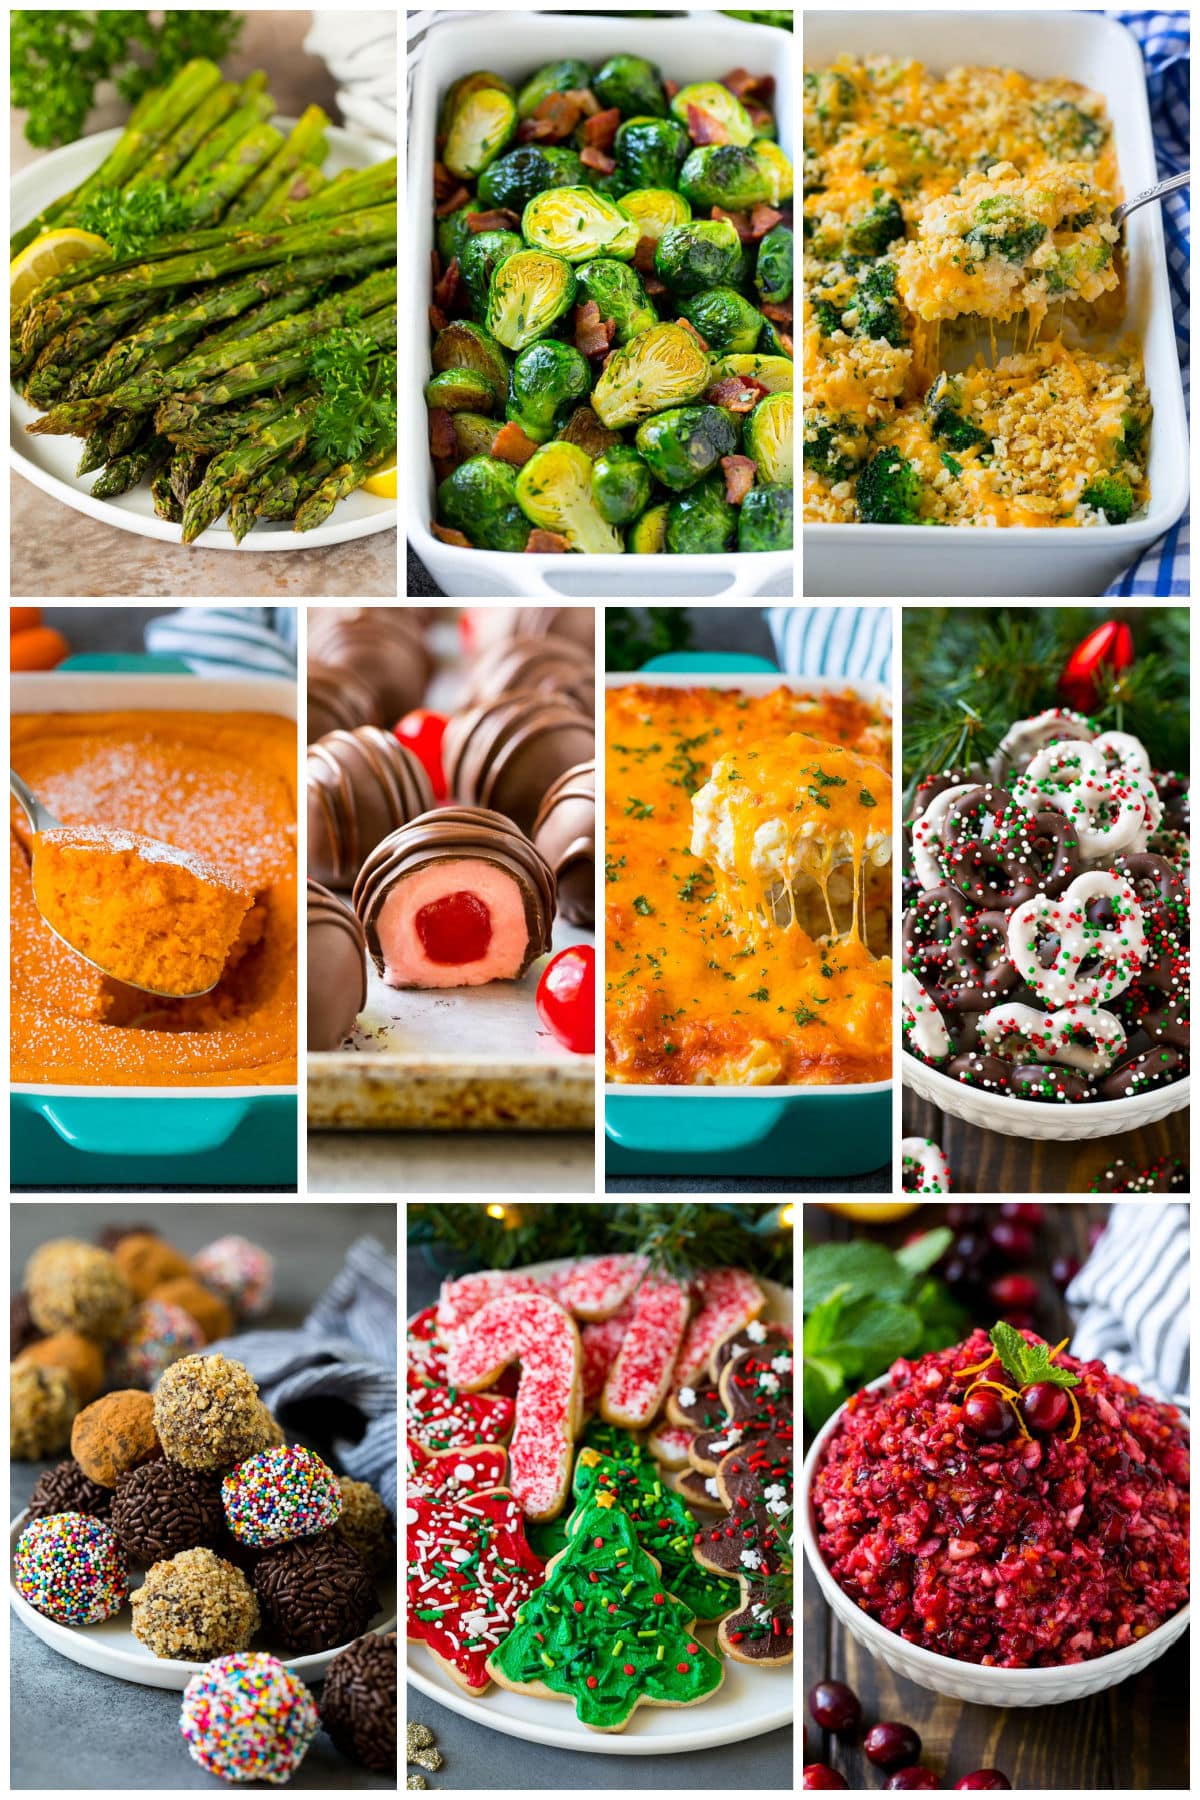 Images in a collage of holiday entertaining recipes including cheesy potatoes, chocolate covered pretzels and carrot souffle.